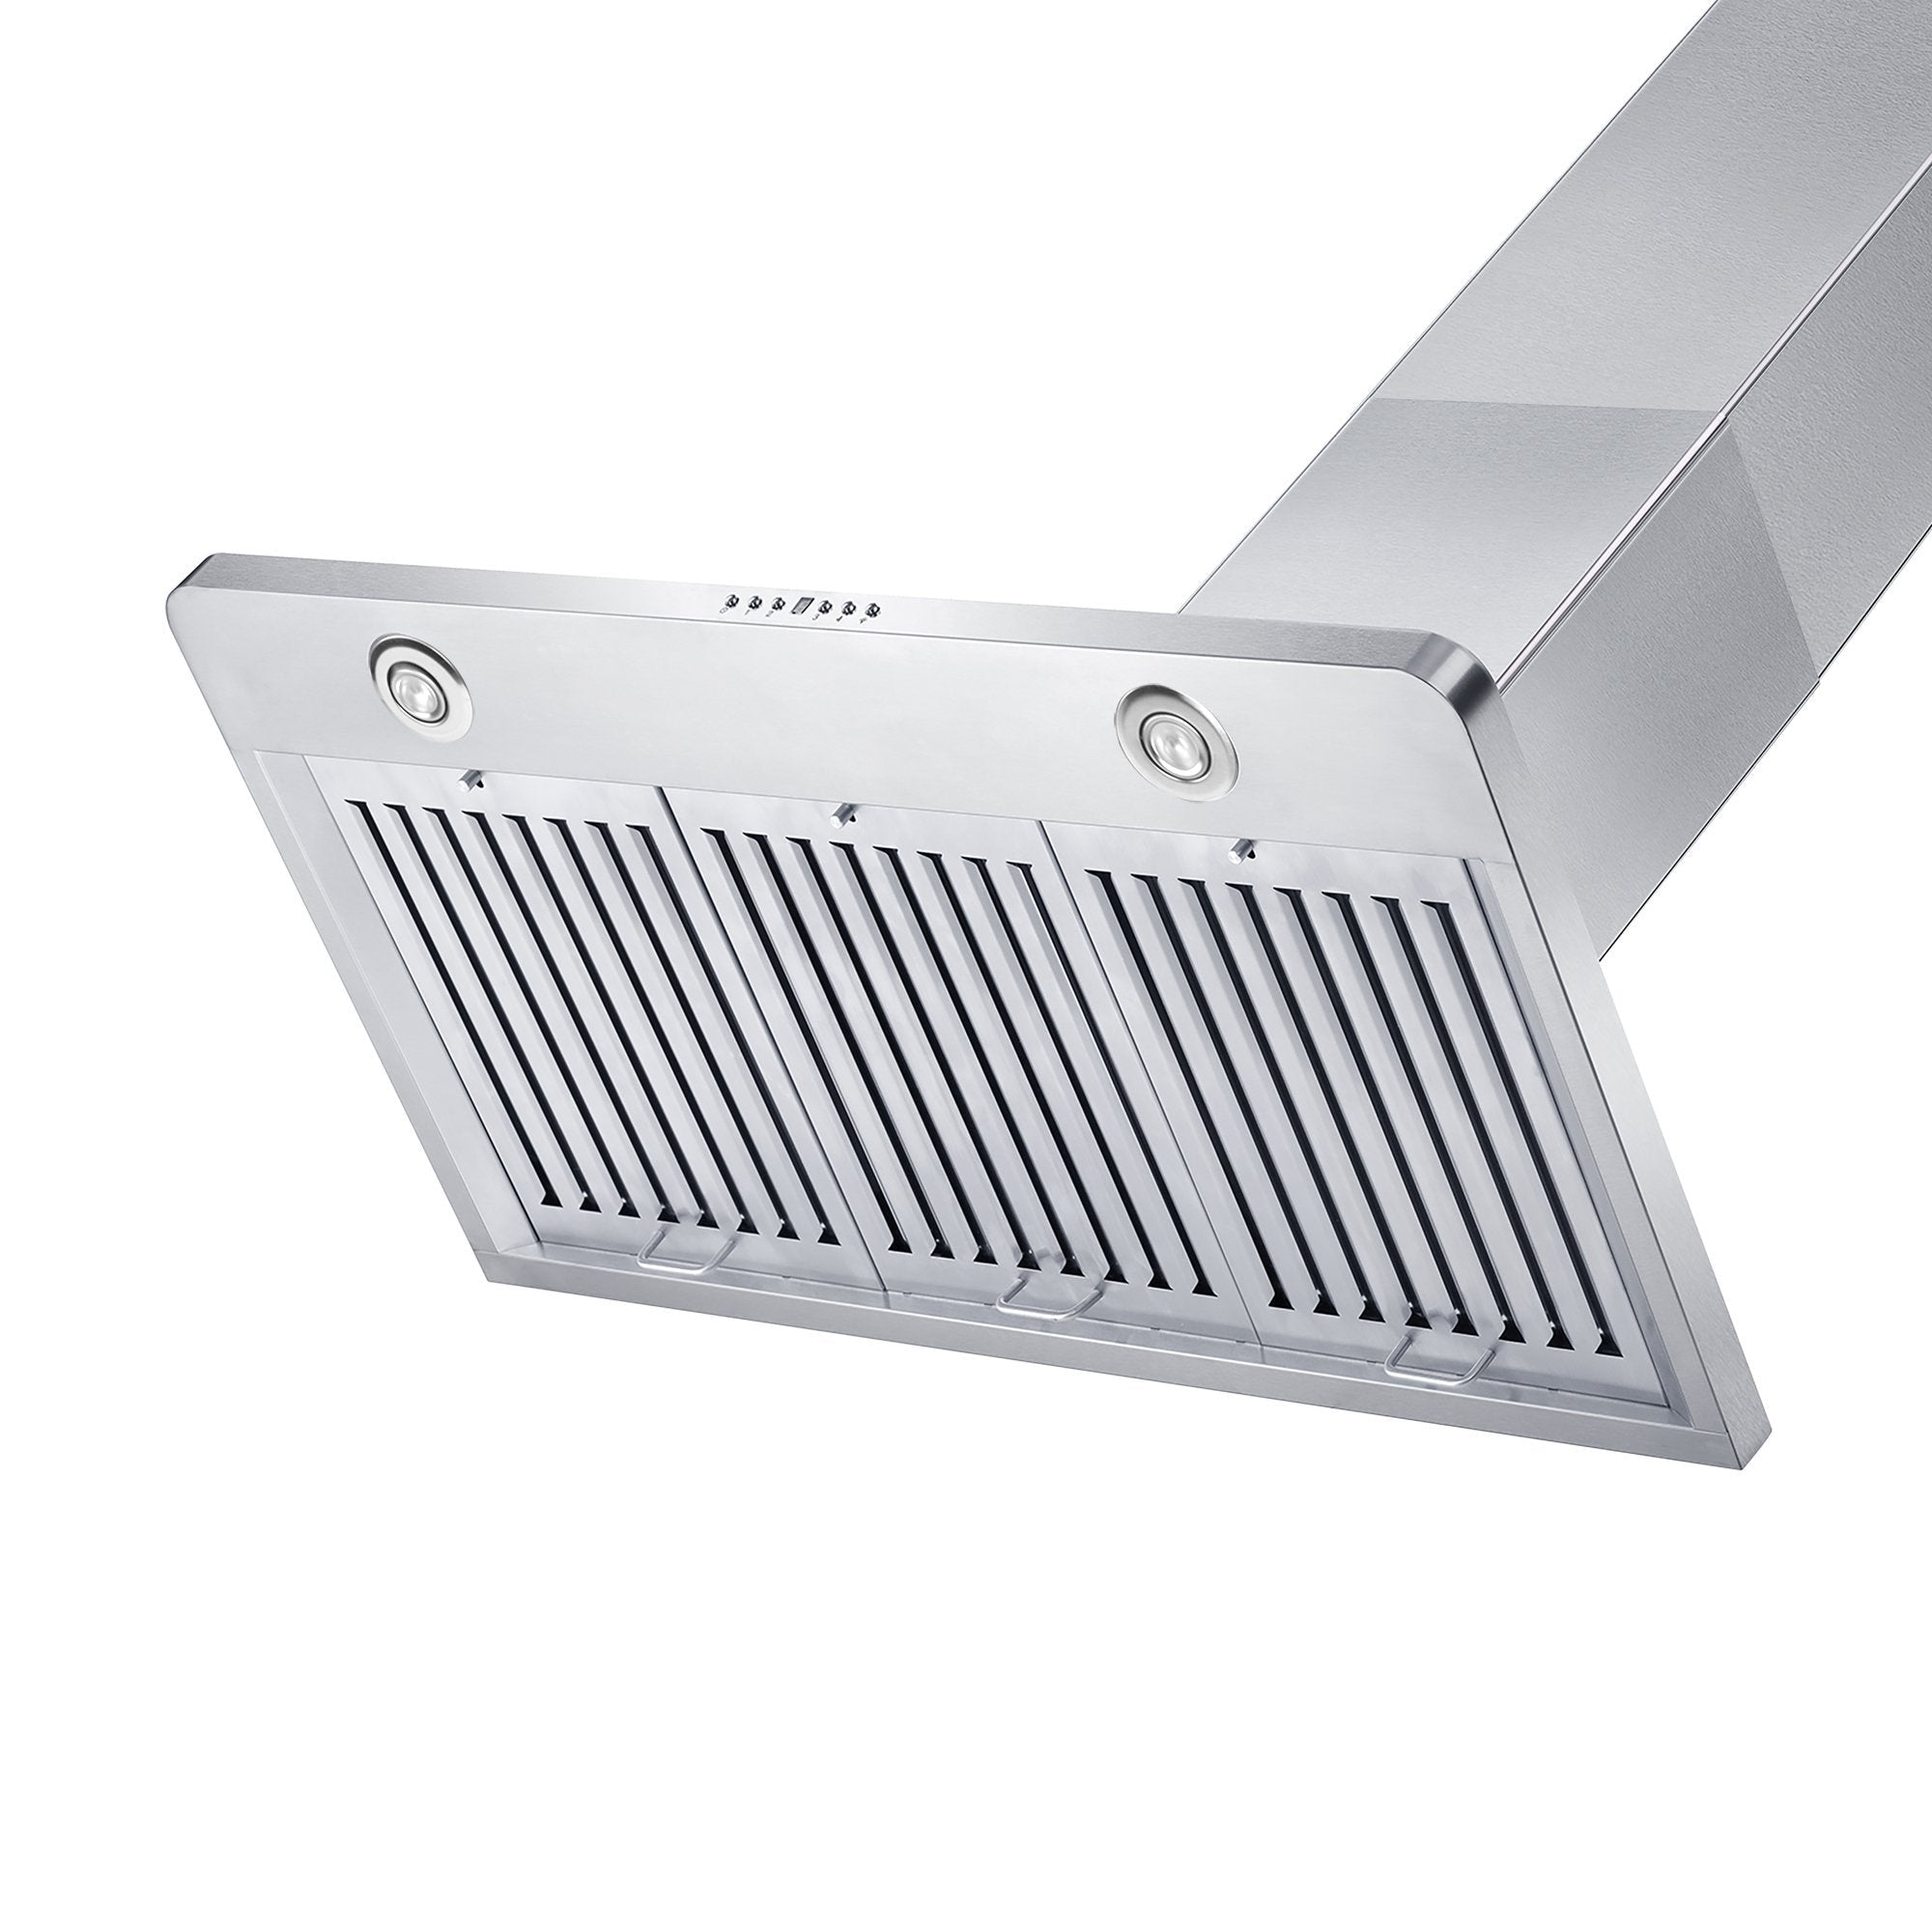 ZLINE Convertible Vent Wall Mount Range Hood in Stainless Steel (KF1) under view showing triple baffle filters and LED lighting.